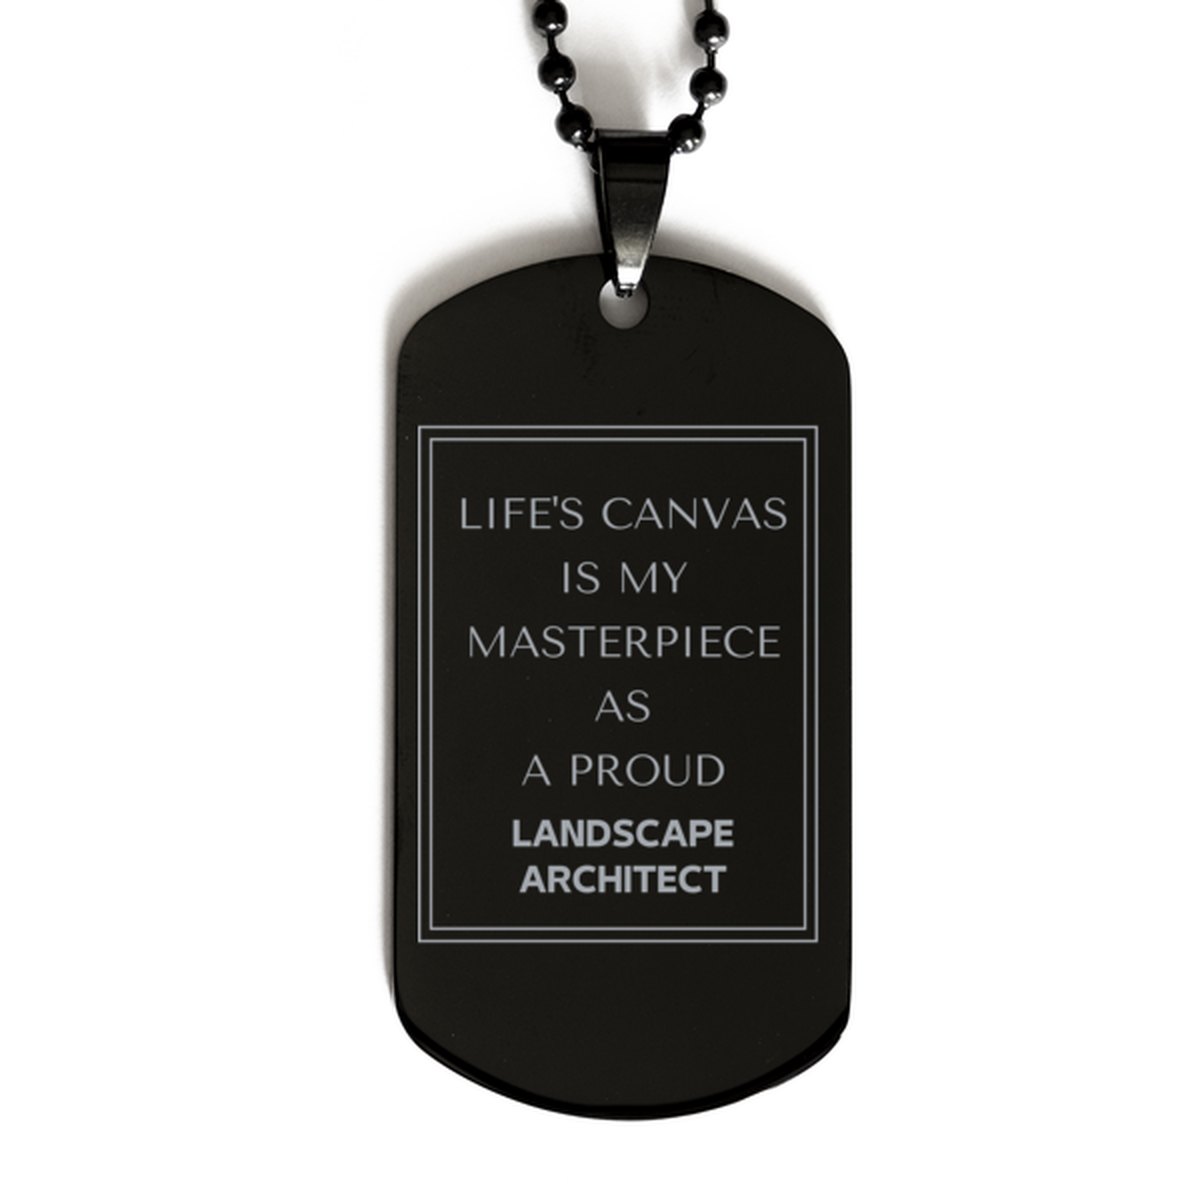 Proud Landscape Architect Gifts, Life's canvas is my masterpiece, Epic Birthday Christmas Unique Black Dog Tag For Landscape Architect, Coworkers, Men, Women, Friends